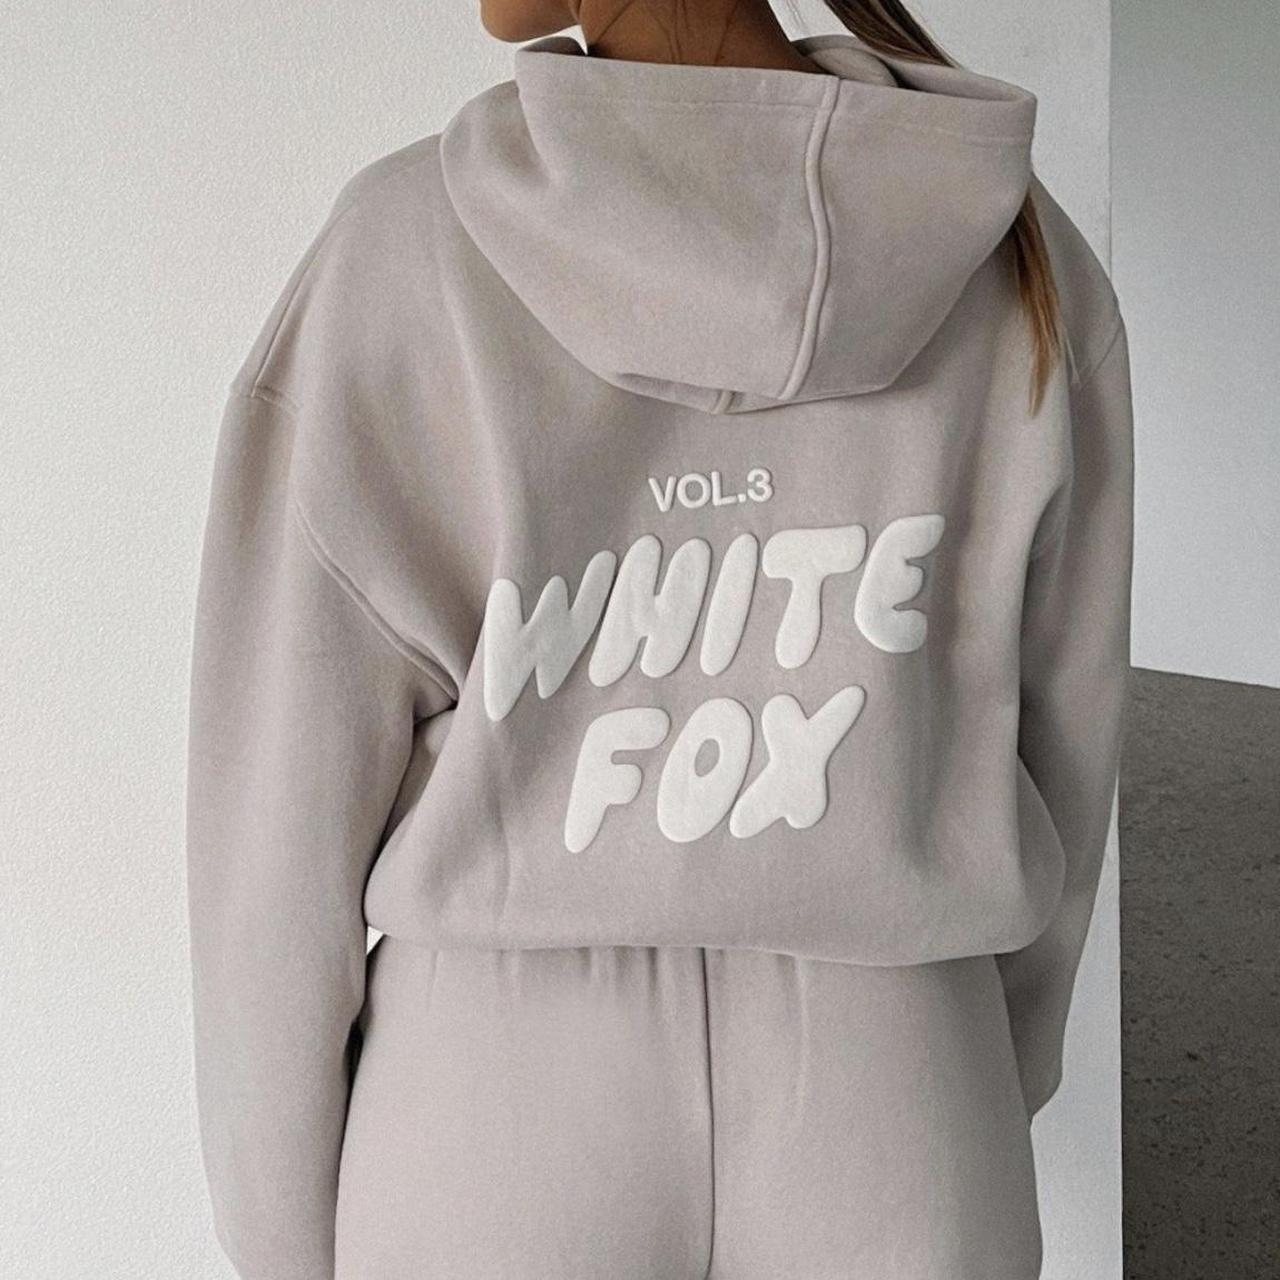 white fox style hoodie🤍 Perfect for everyday -... - Depop